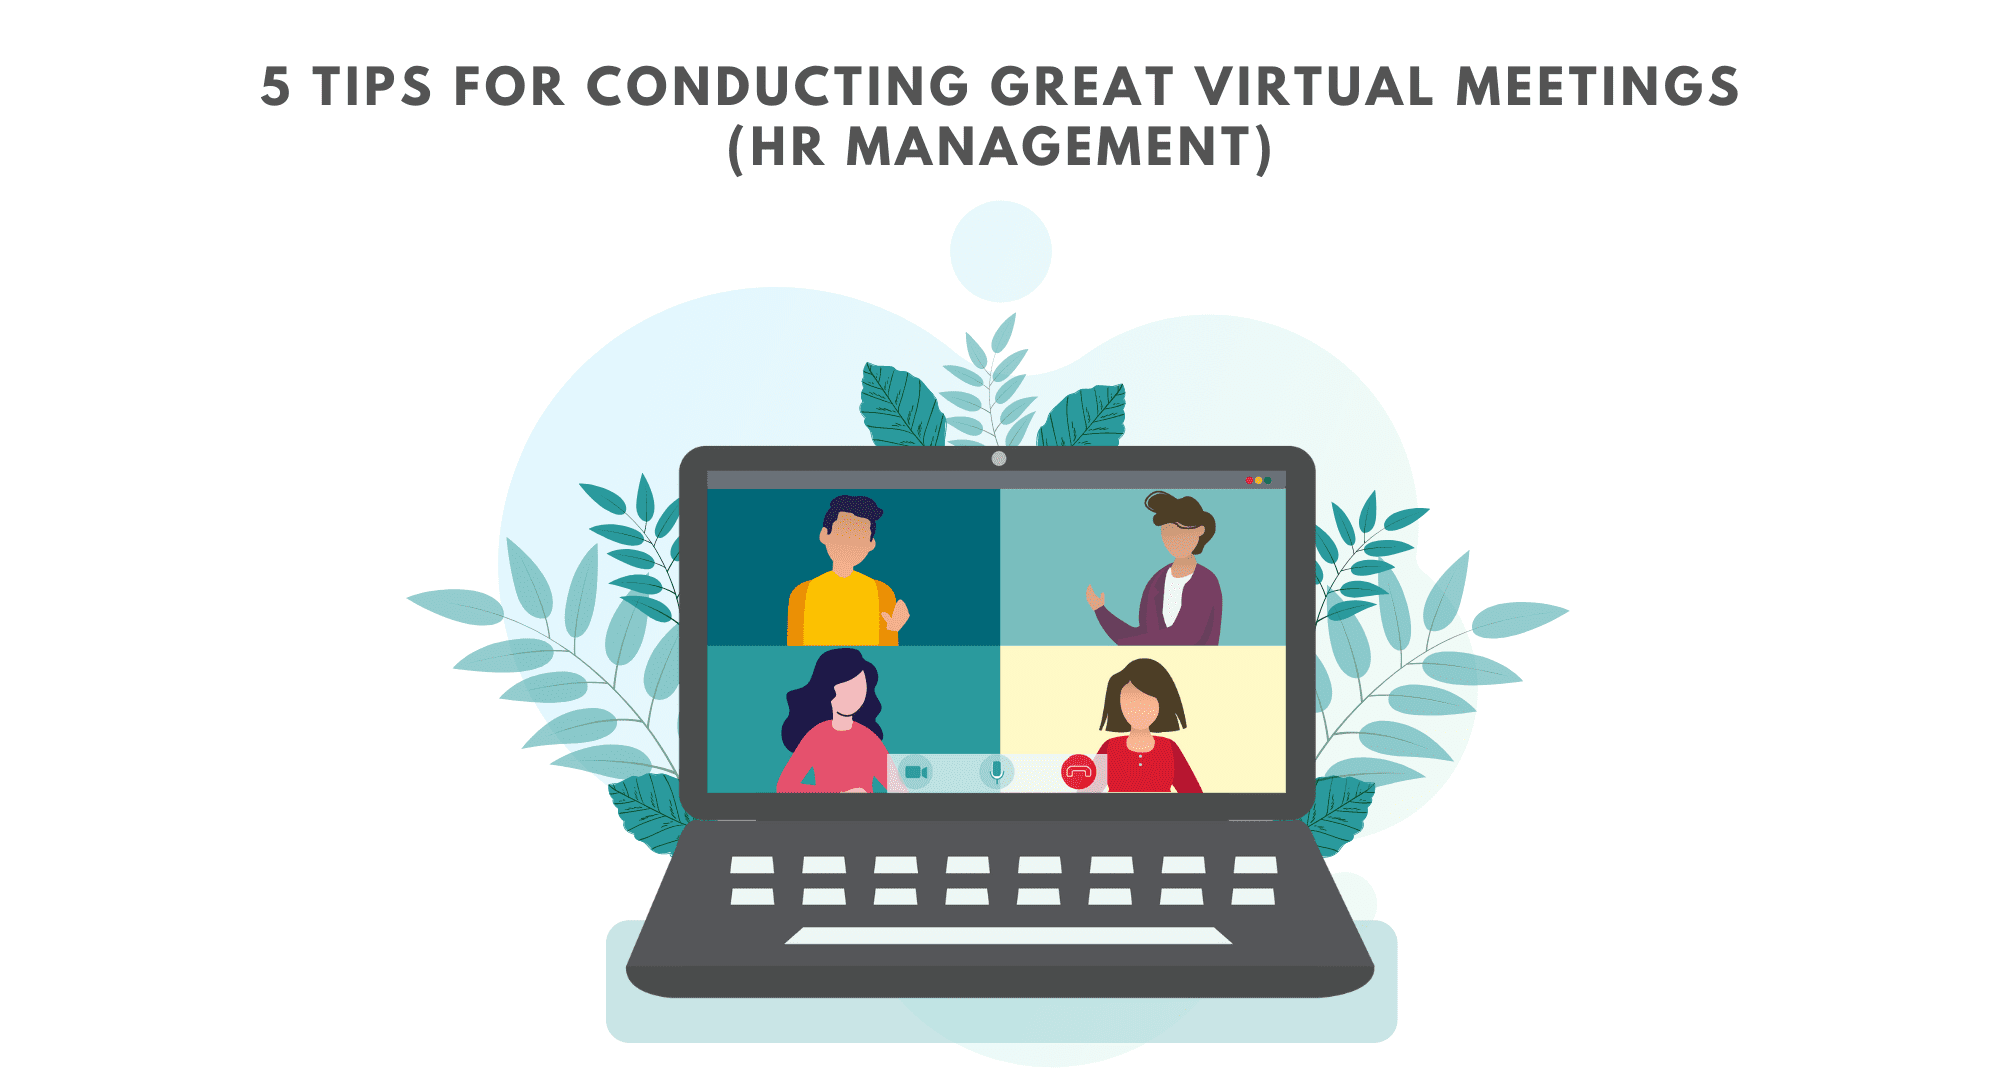 tips for conducting great virtual meetings. How to conduct great virtual meetings. Guide for conducting virtual meetings. How to conduct virtual meetings successfully.